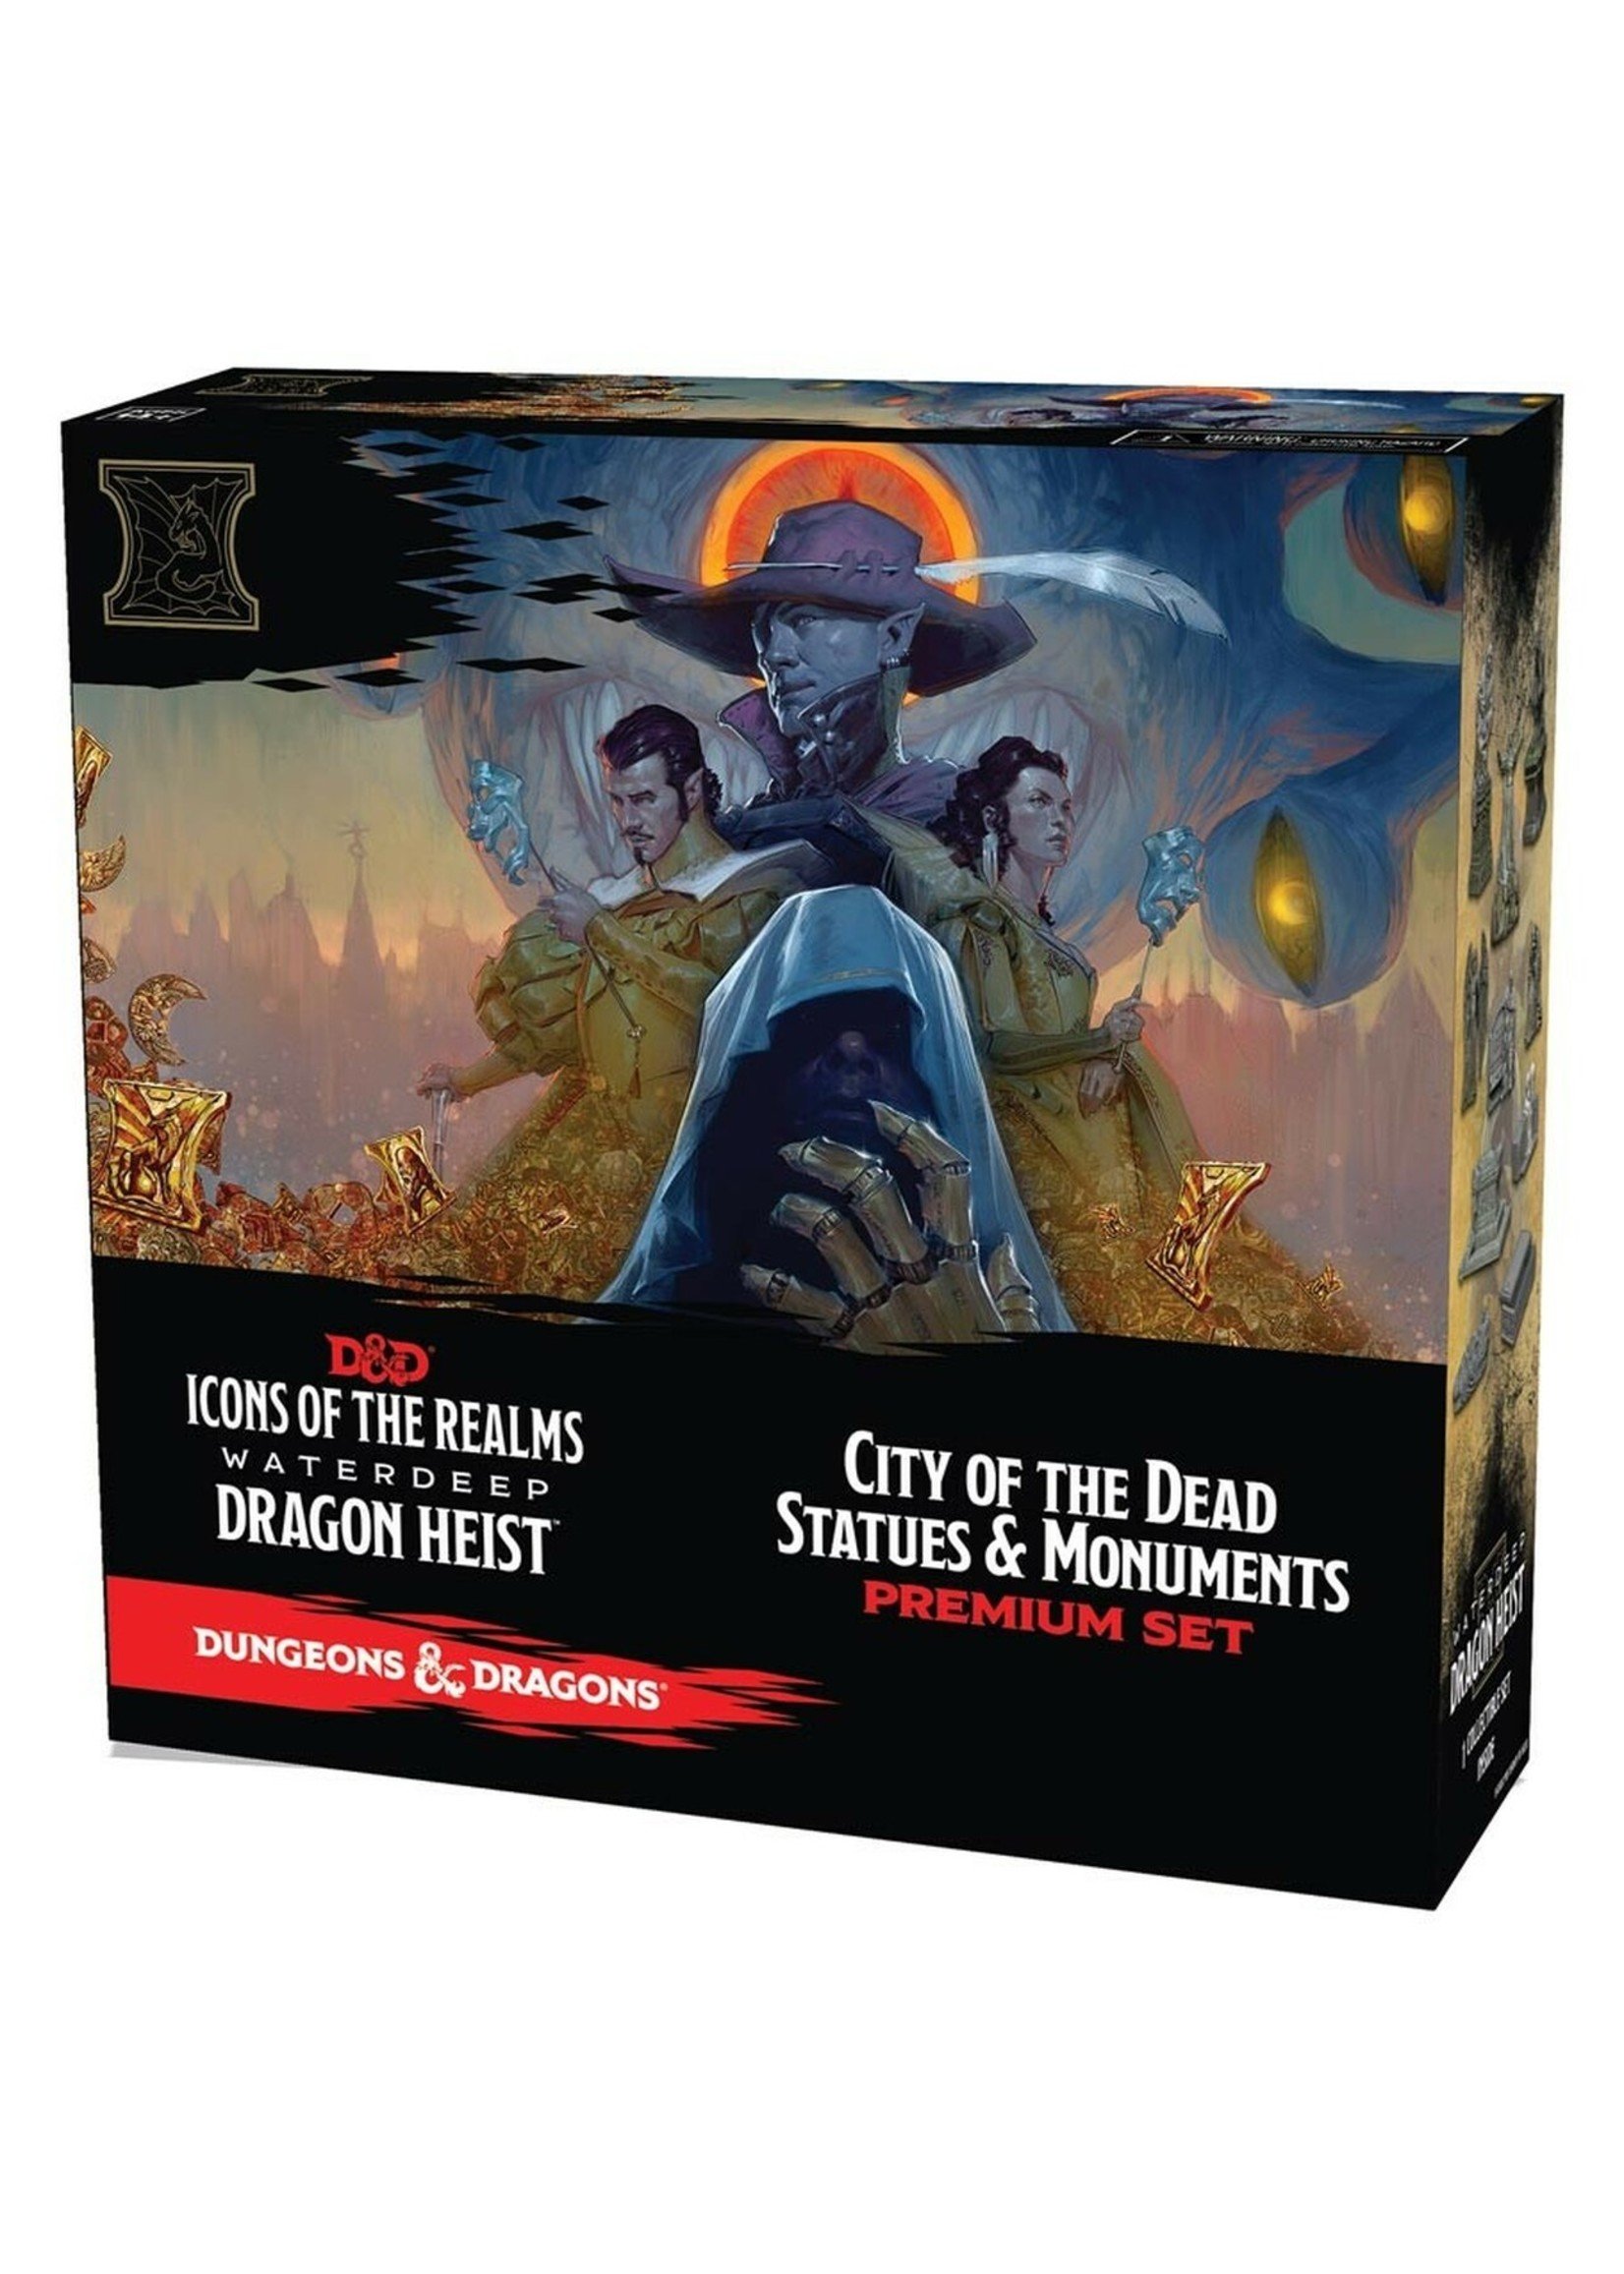 Dungeons & Dragons 5e Dungeons & Dragons Fantasy Miniatures: Icons of the Realms Set 9 Waterdeep Dragon Heist - City of the Dead Case Incentive